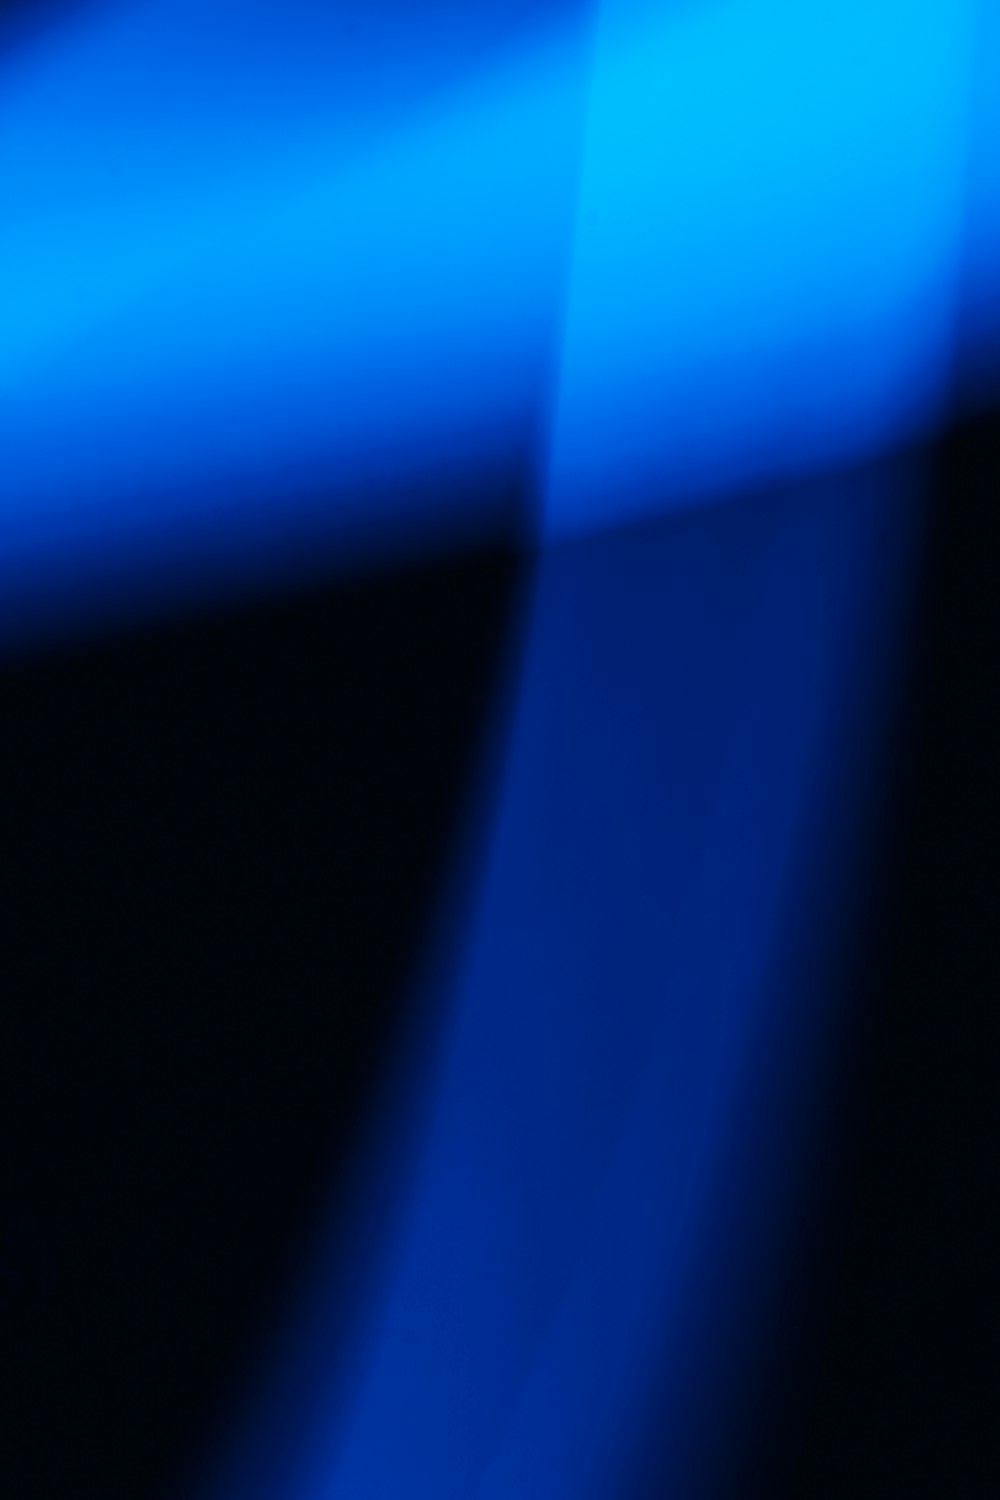 a blurry image of a blue and black background